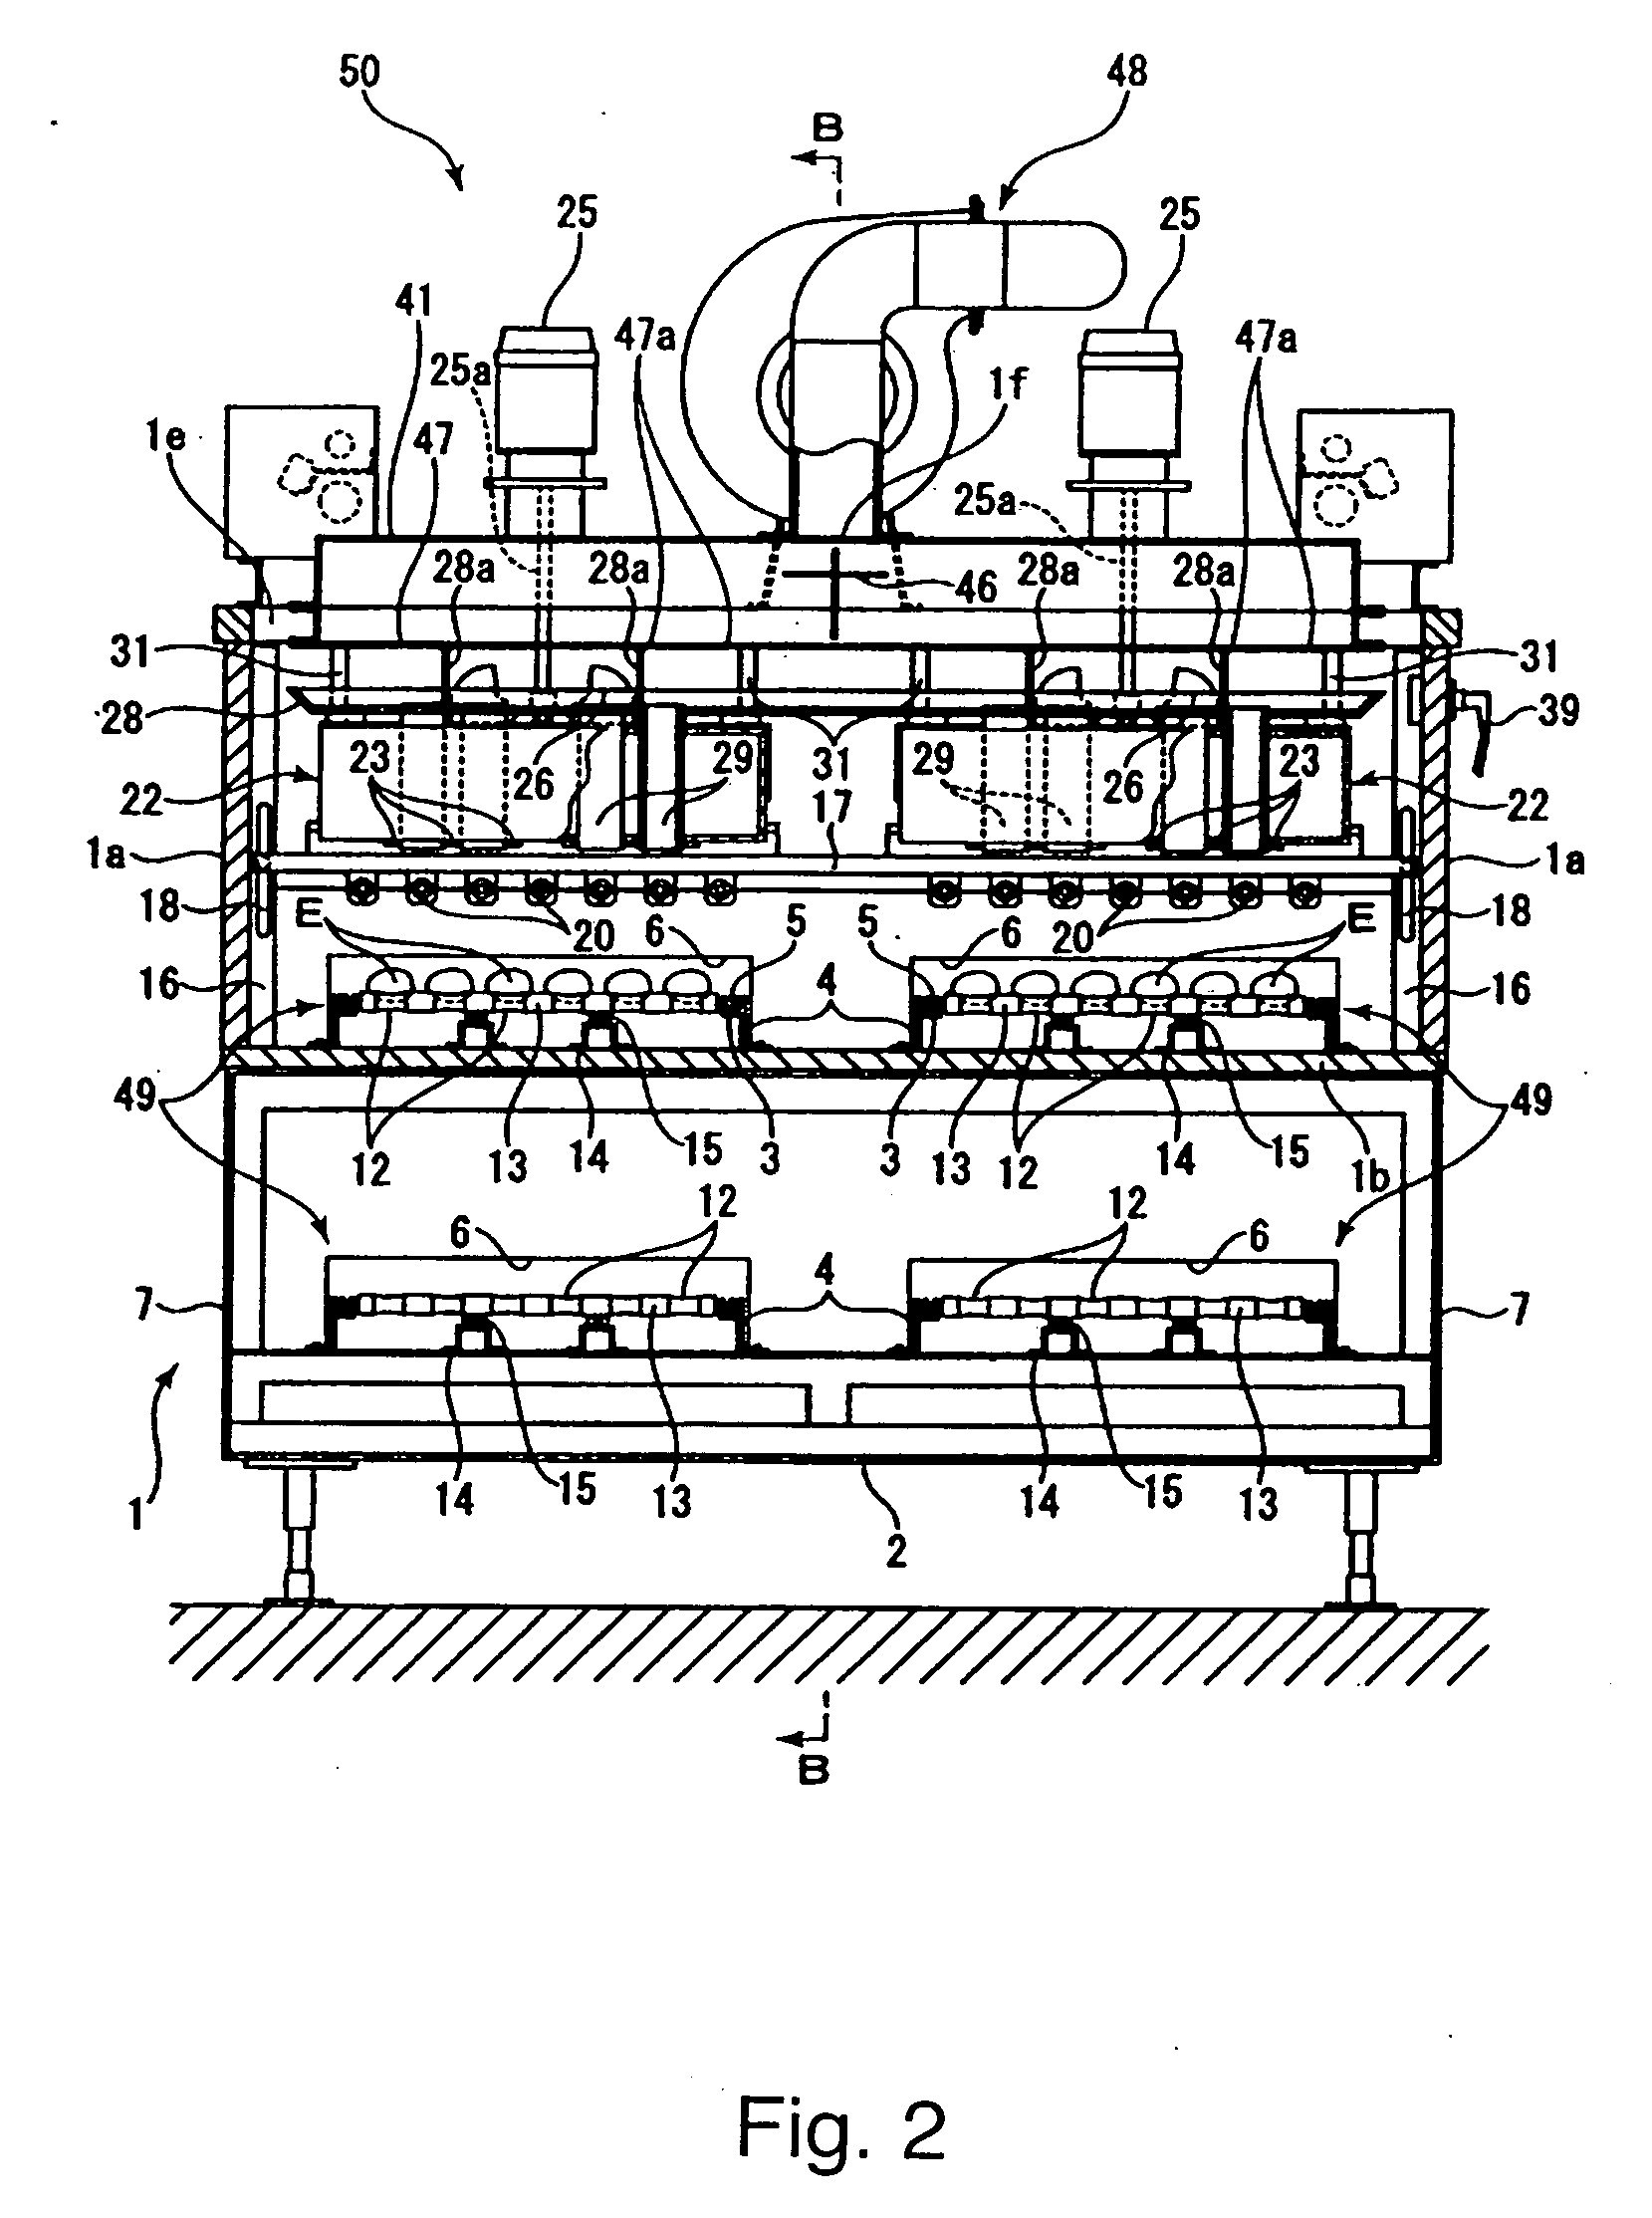 Apparatus for Cooking Food